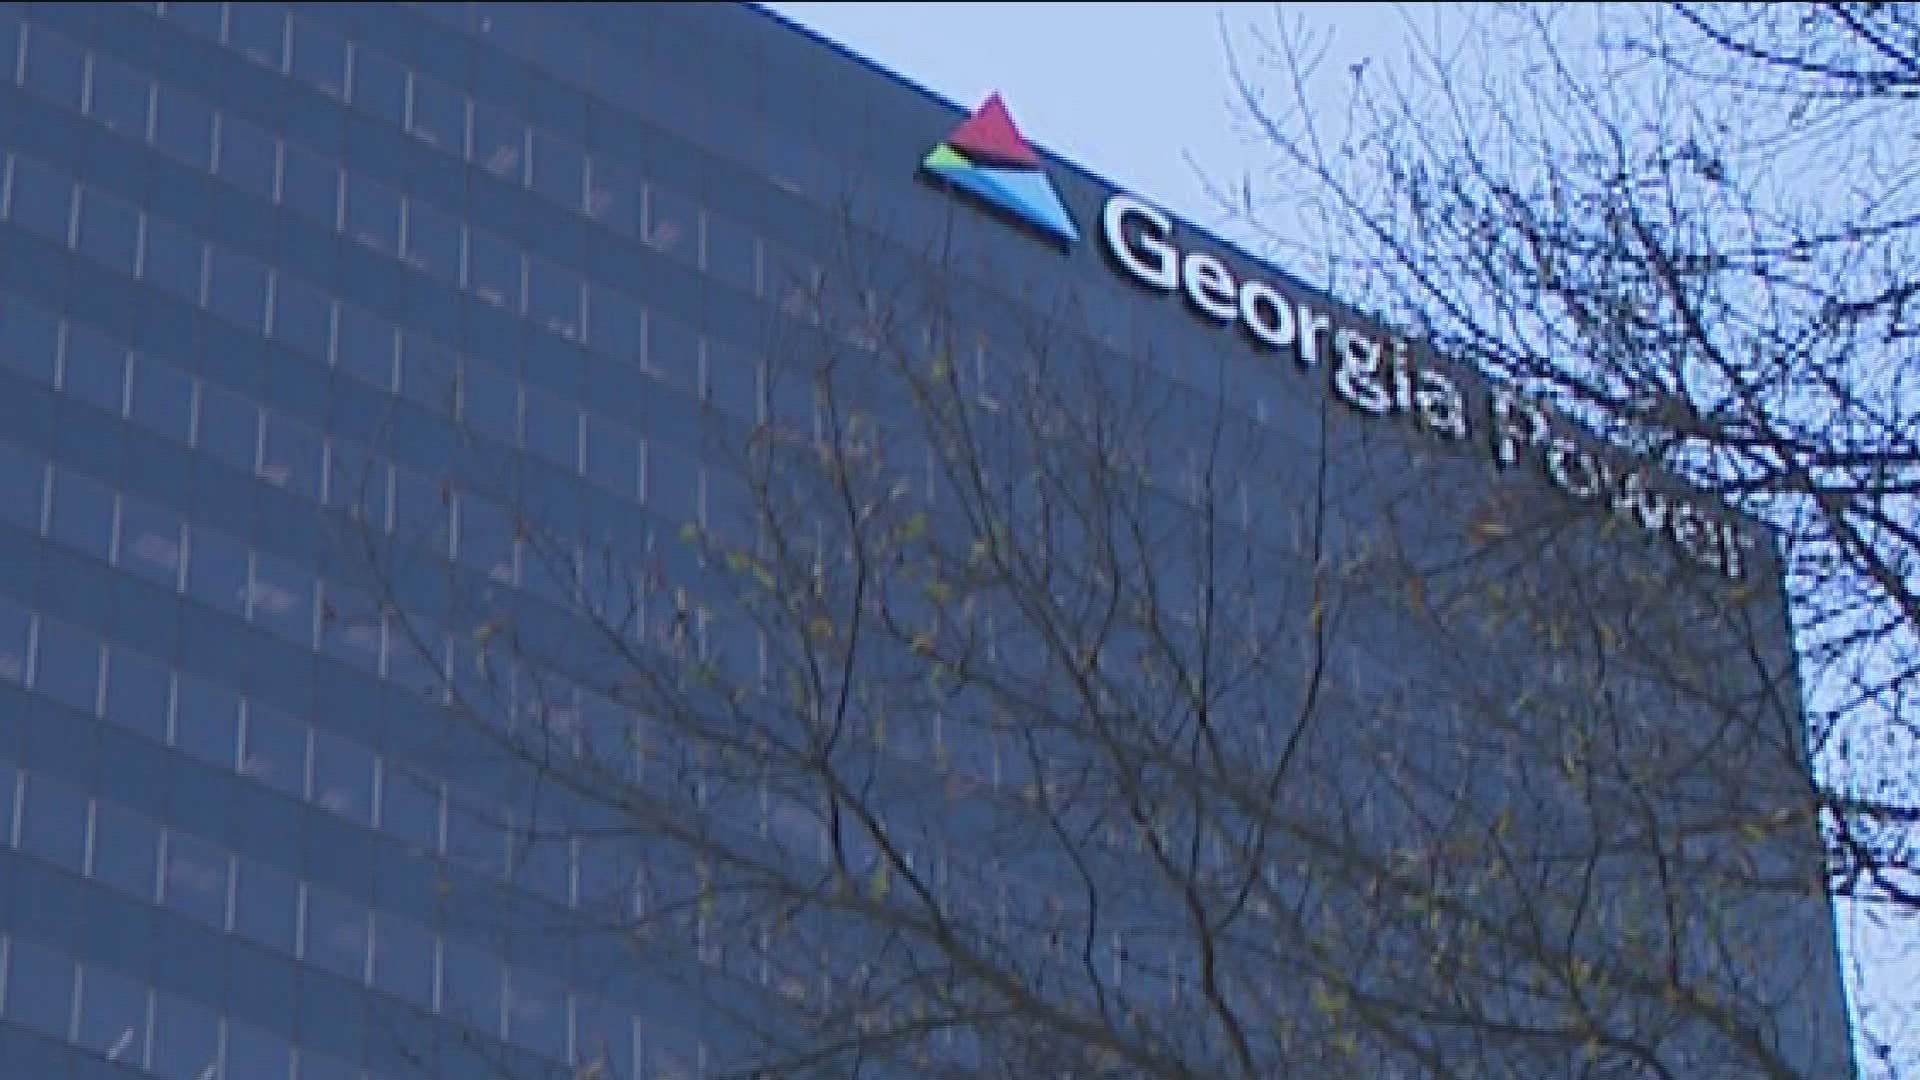 Georgia Power is giving residents a “one-time credit” on their March bill. This credit applies to customers who had active accounts during 2022.